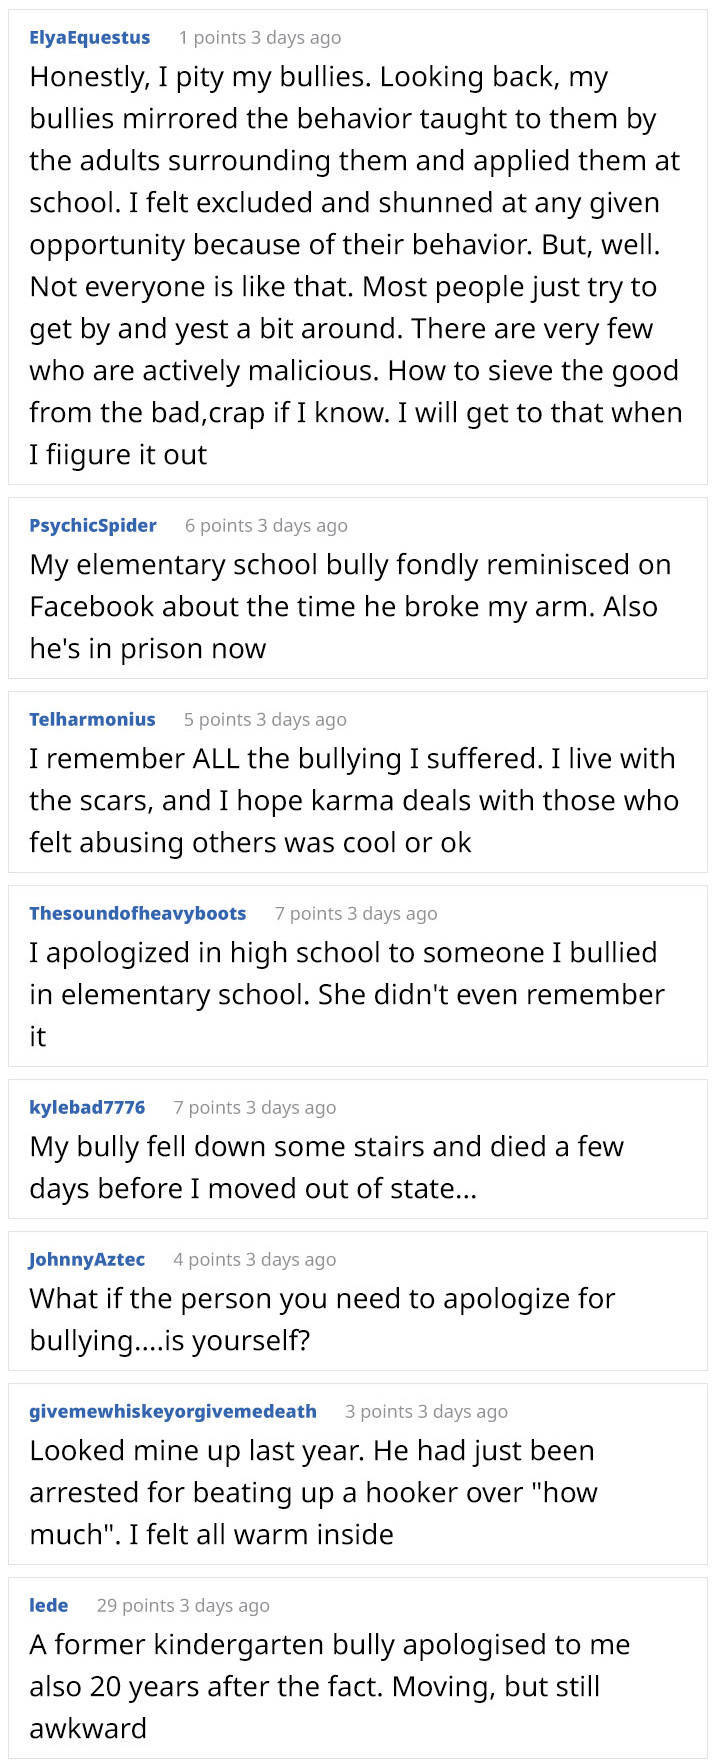 Not All Bullies Stay Bad For The Rest Of Their Lives